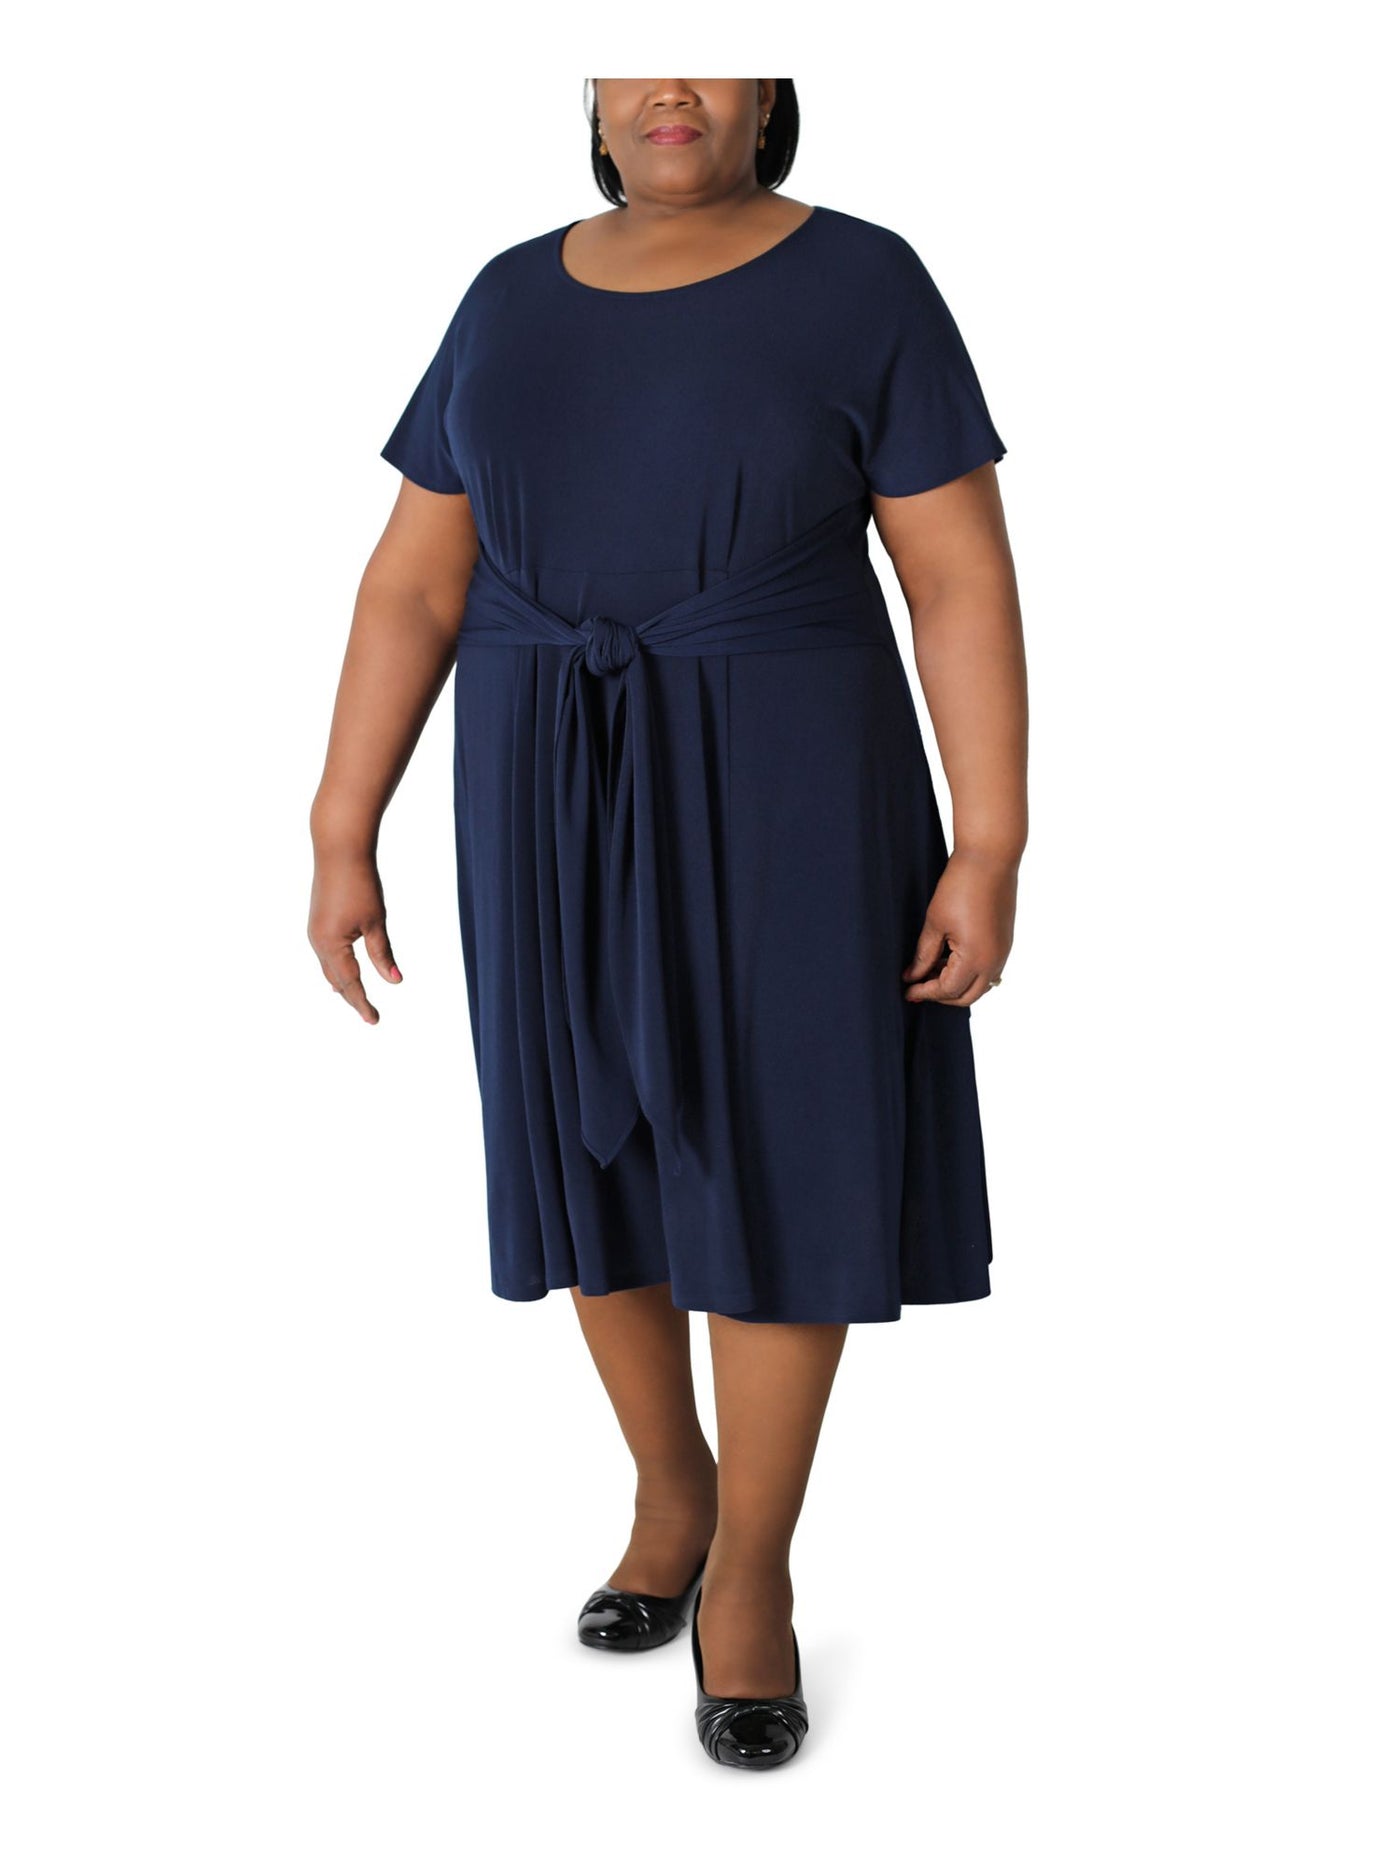 SIGNATURE BY ROBBIE BEE Womens Navy Stretch Belted Handkerchief Hem Unlined Short Sleeve Round Neck Tea-Length Wear To Work Fit + Flare Dress Plus 2X